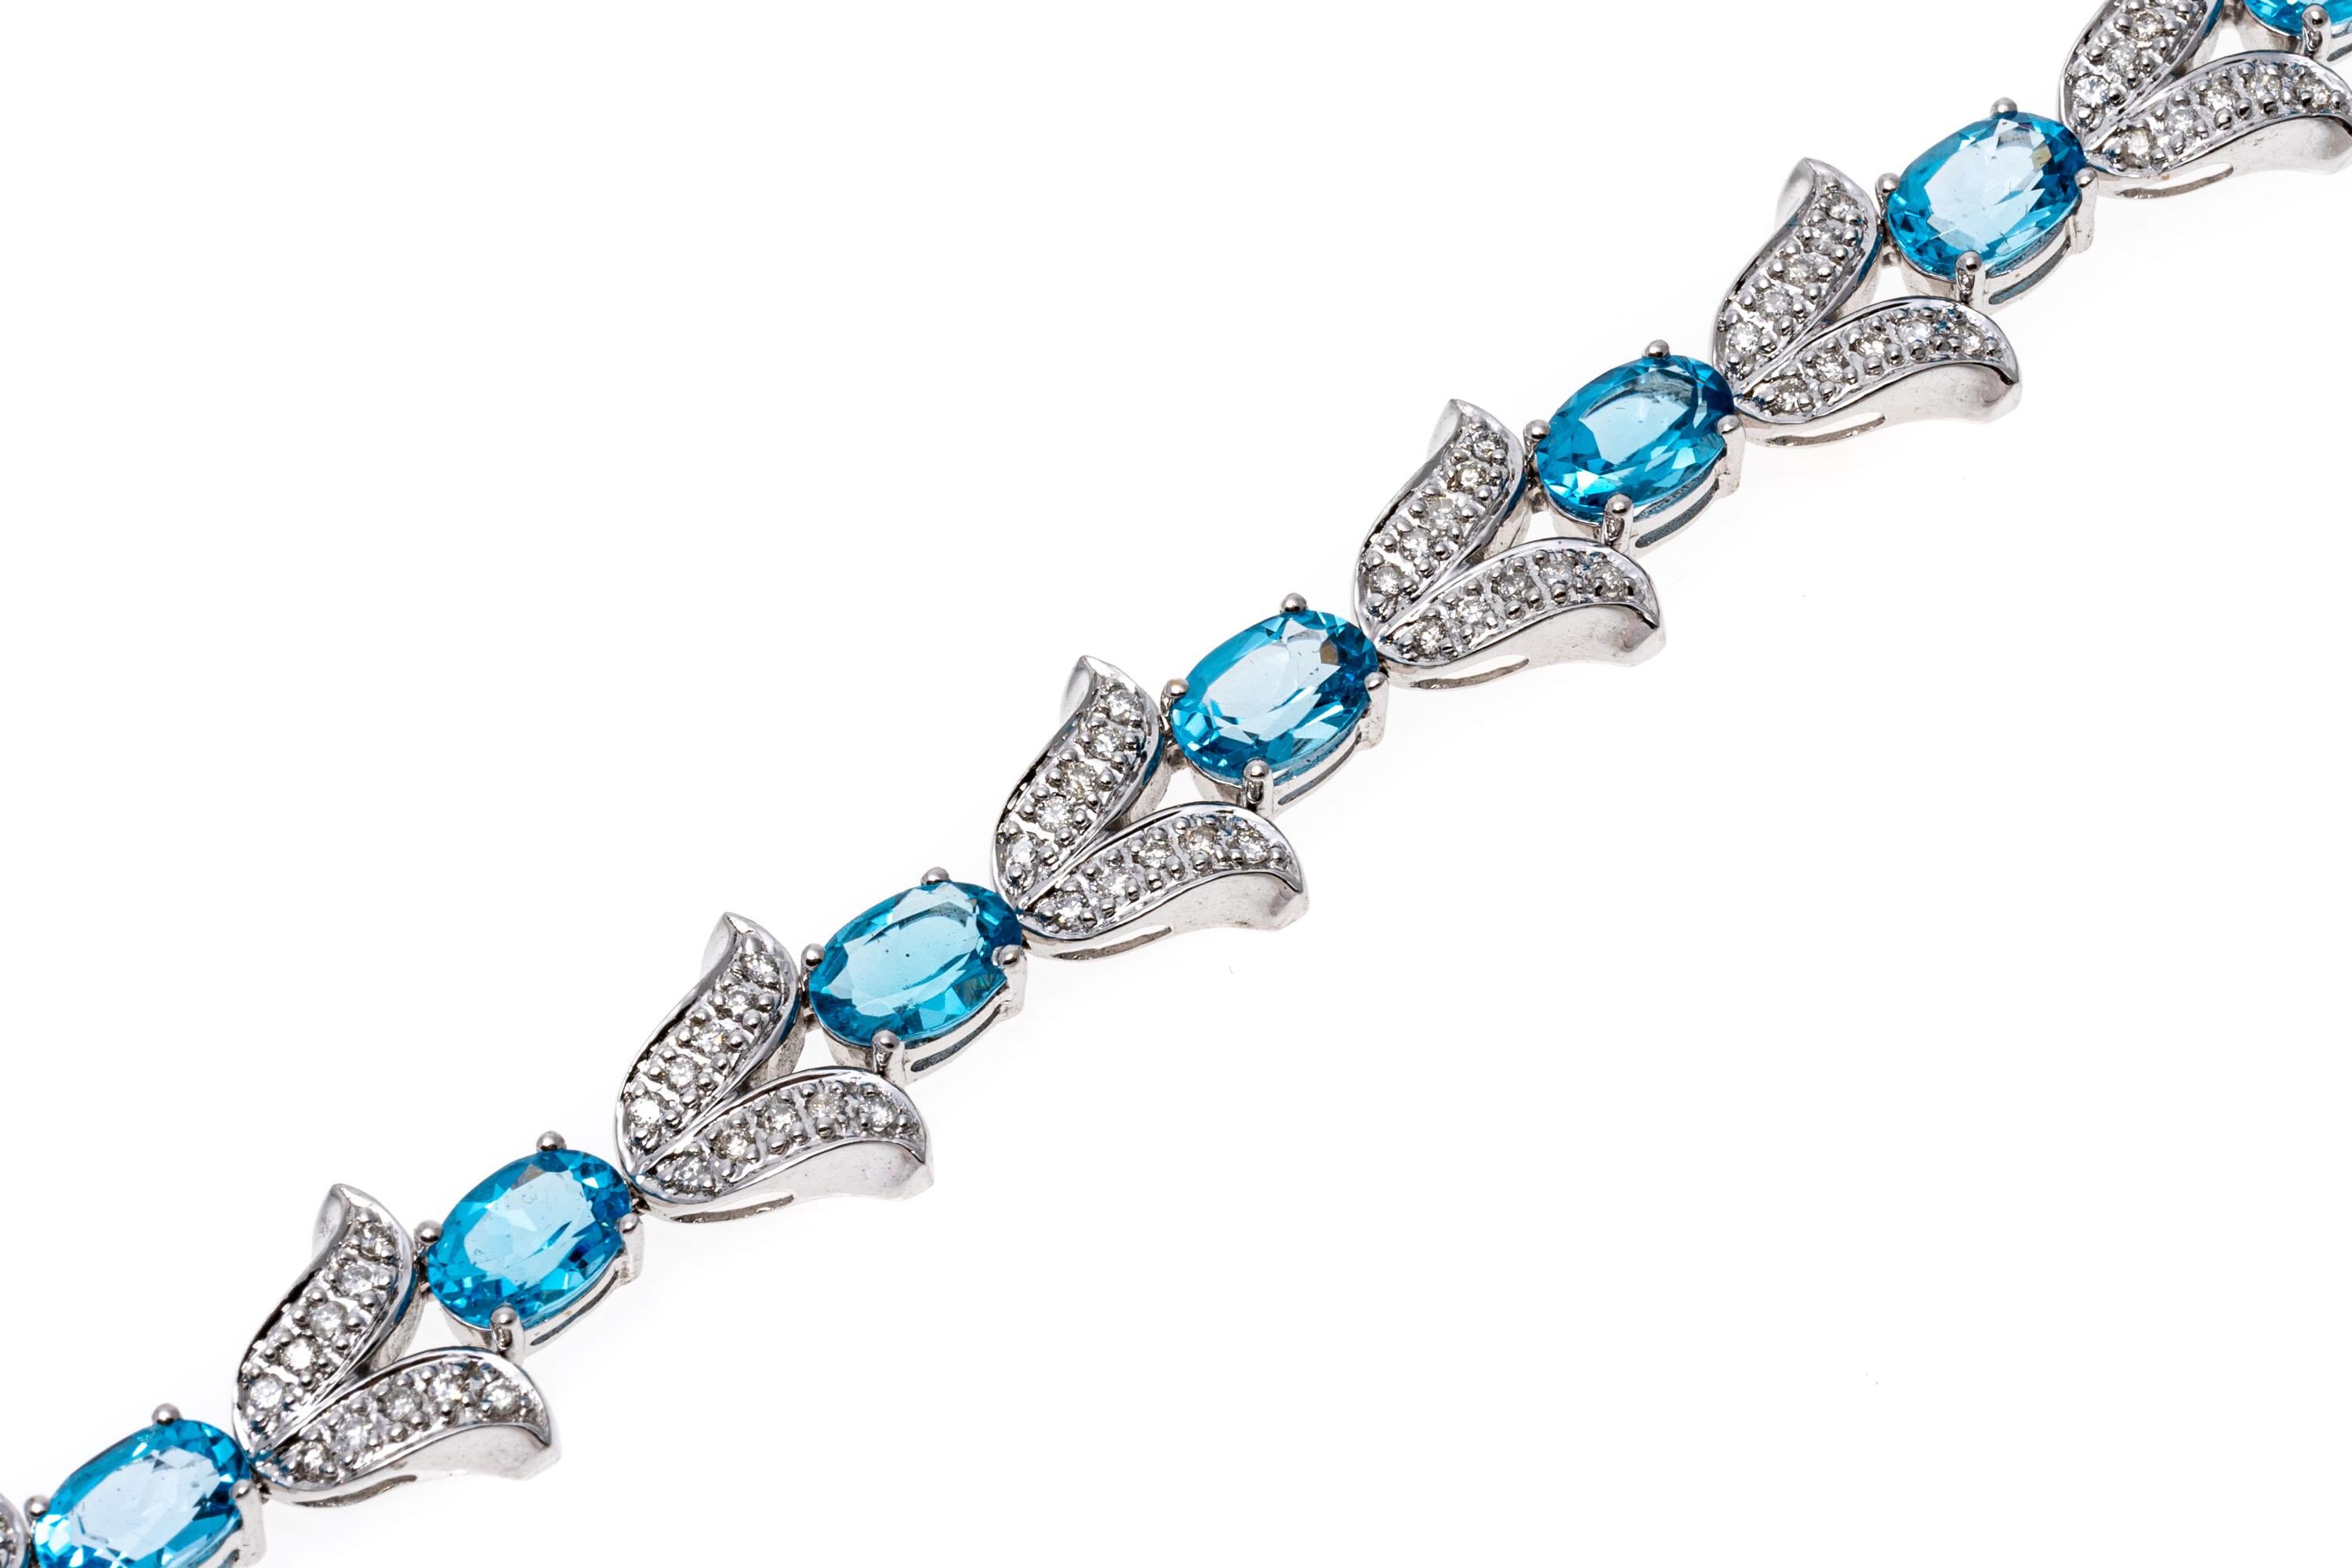 14k white gold bracelet. This gorgeous bracelet features oval faceted, medium blue color blue topaz stones, approximately 10.35 TCW, prong set, alternating with tulip shaped links set with accent diamonds, 0.92 TCW. The bracelet has a hidden box